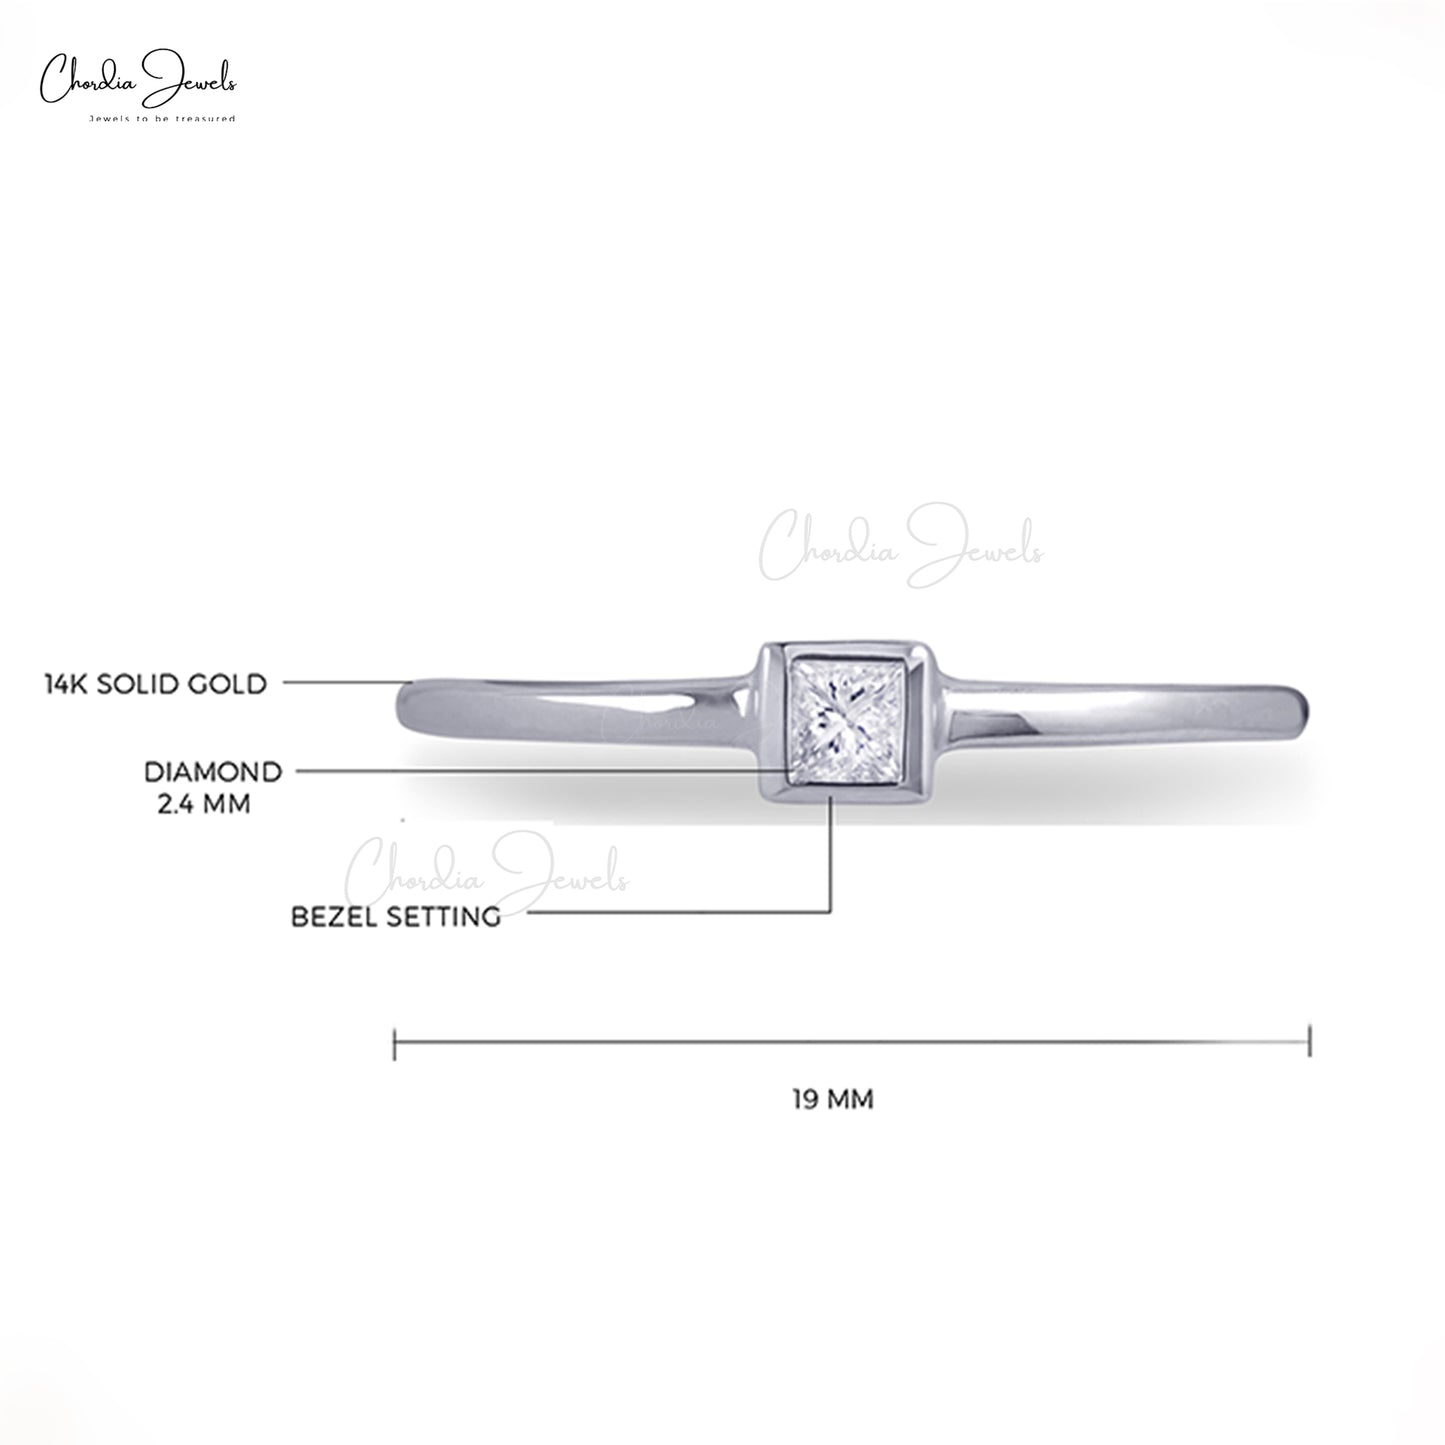 G-H White Diamond Bezel Set Ring Size US-6.5 14k Solid White Gold Ring 2.4mm Square Princess Cut Dainty Ring For Engagement